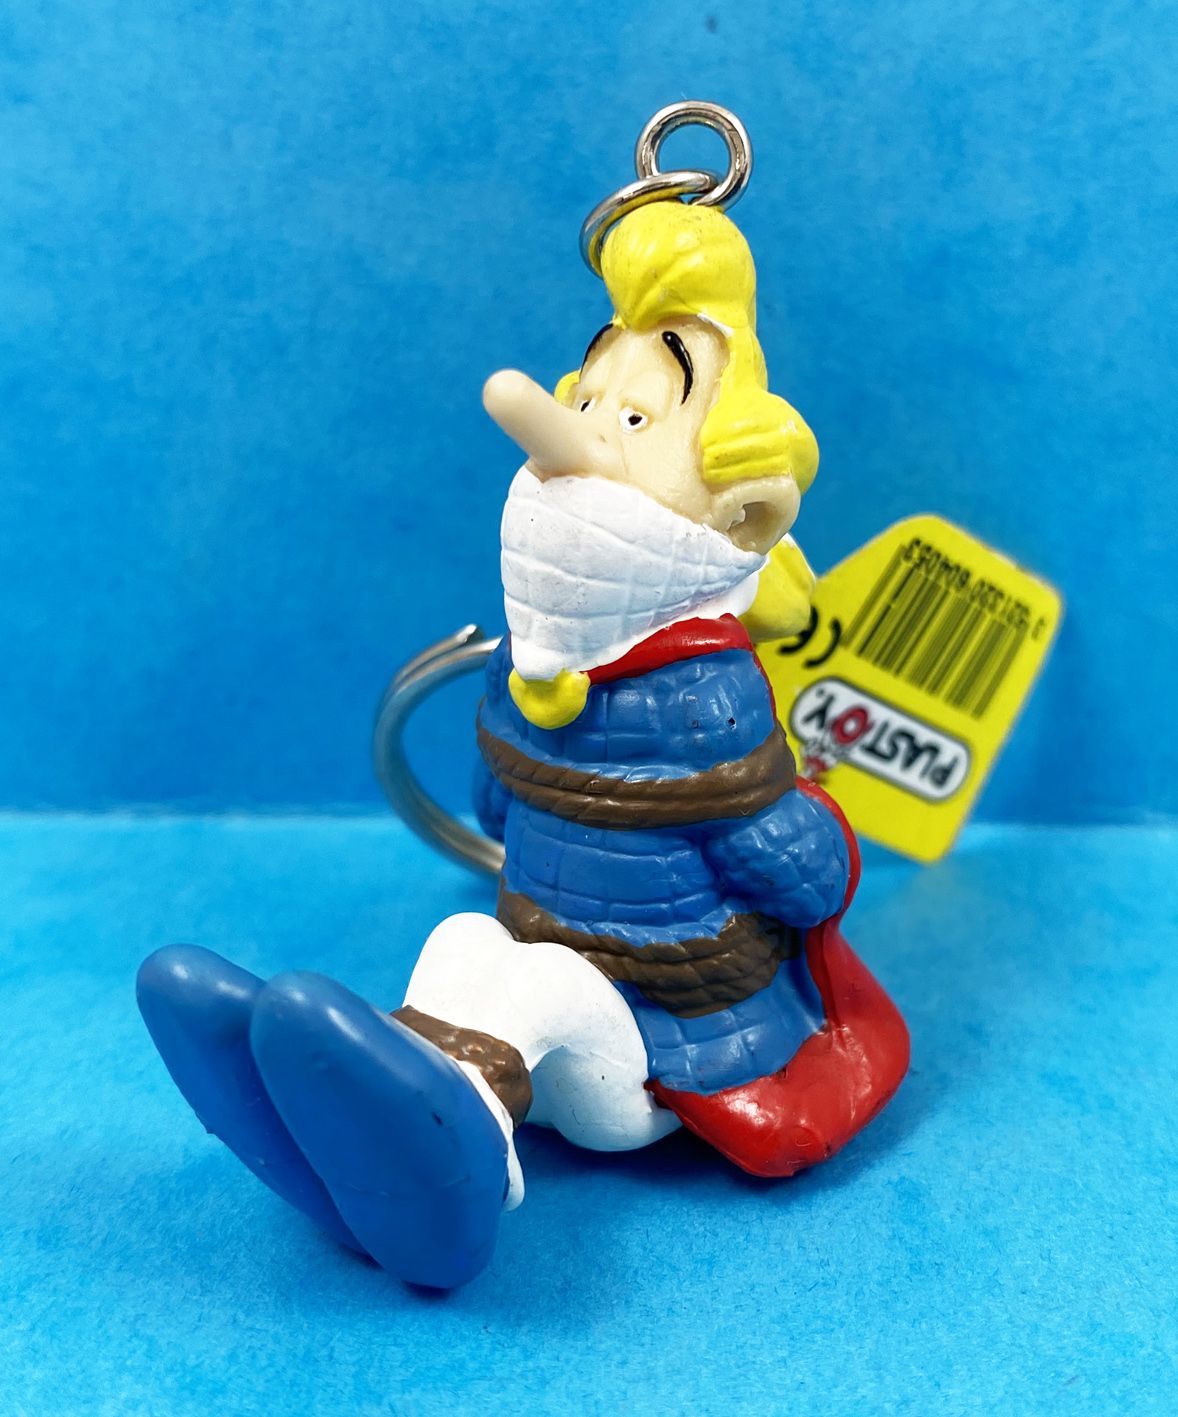 Asterix and Obelix key ring Assurancetourix playing the lyre figurine 604329 